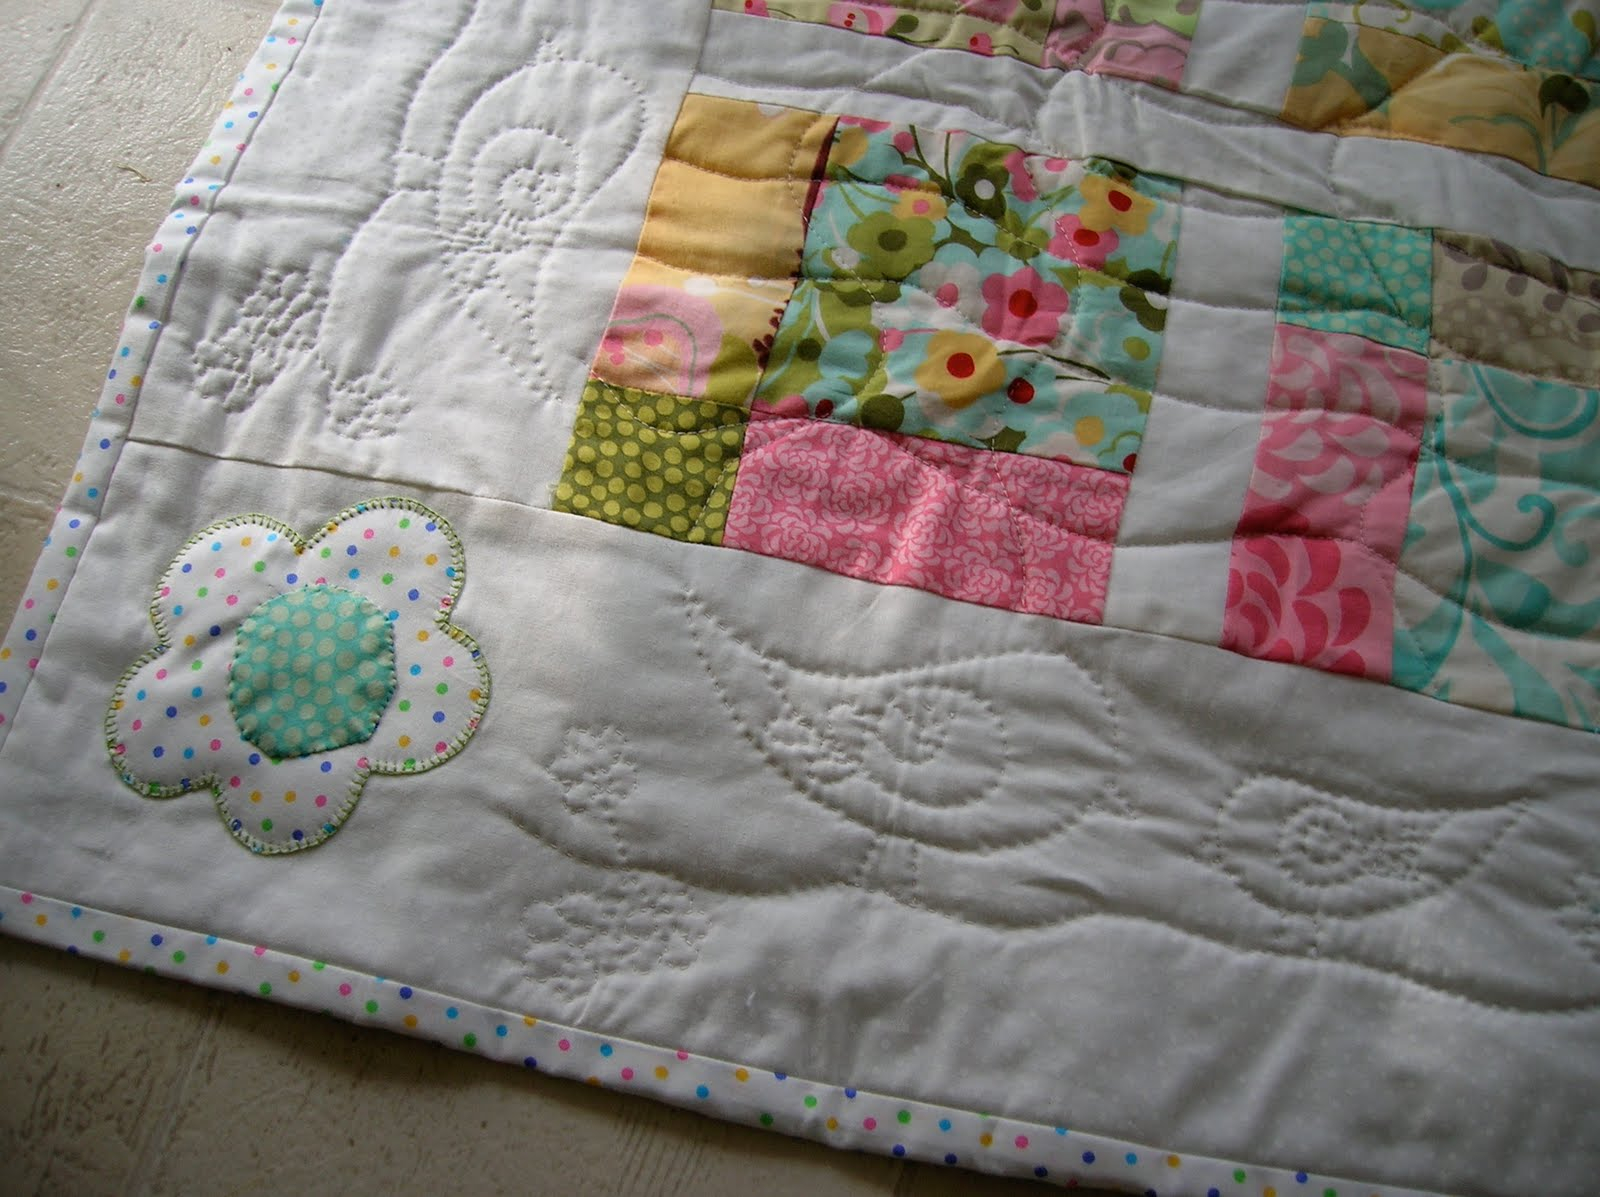 Hand Embroidery Quilt Patterns Hand Embroidery Quilting Free Embroidery Patterns Solid Bedspreads